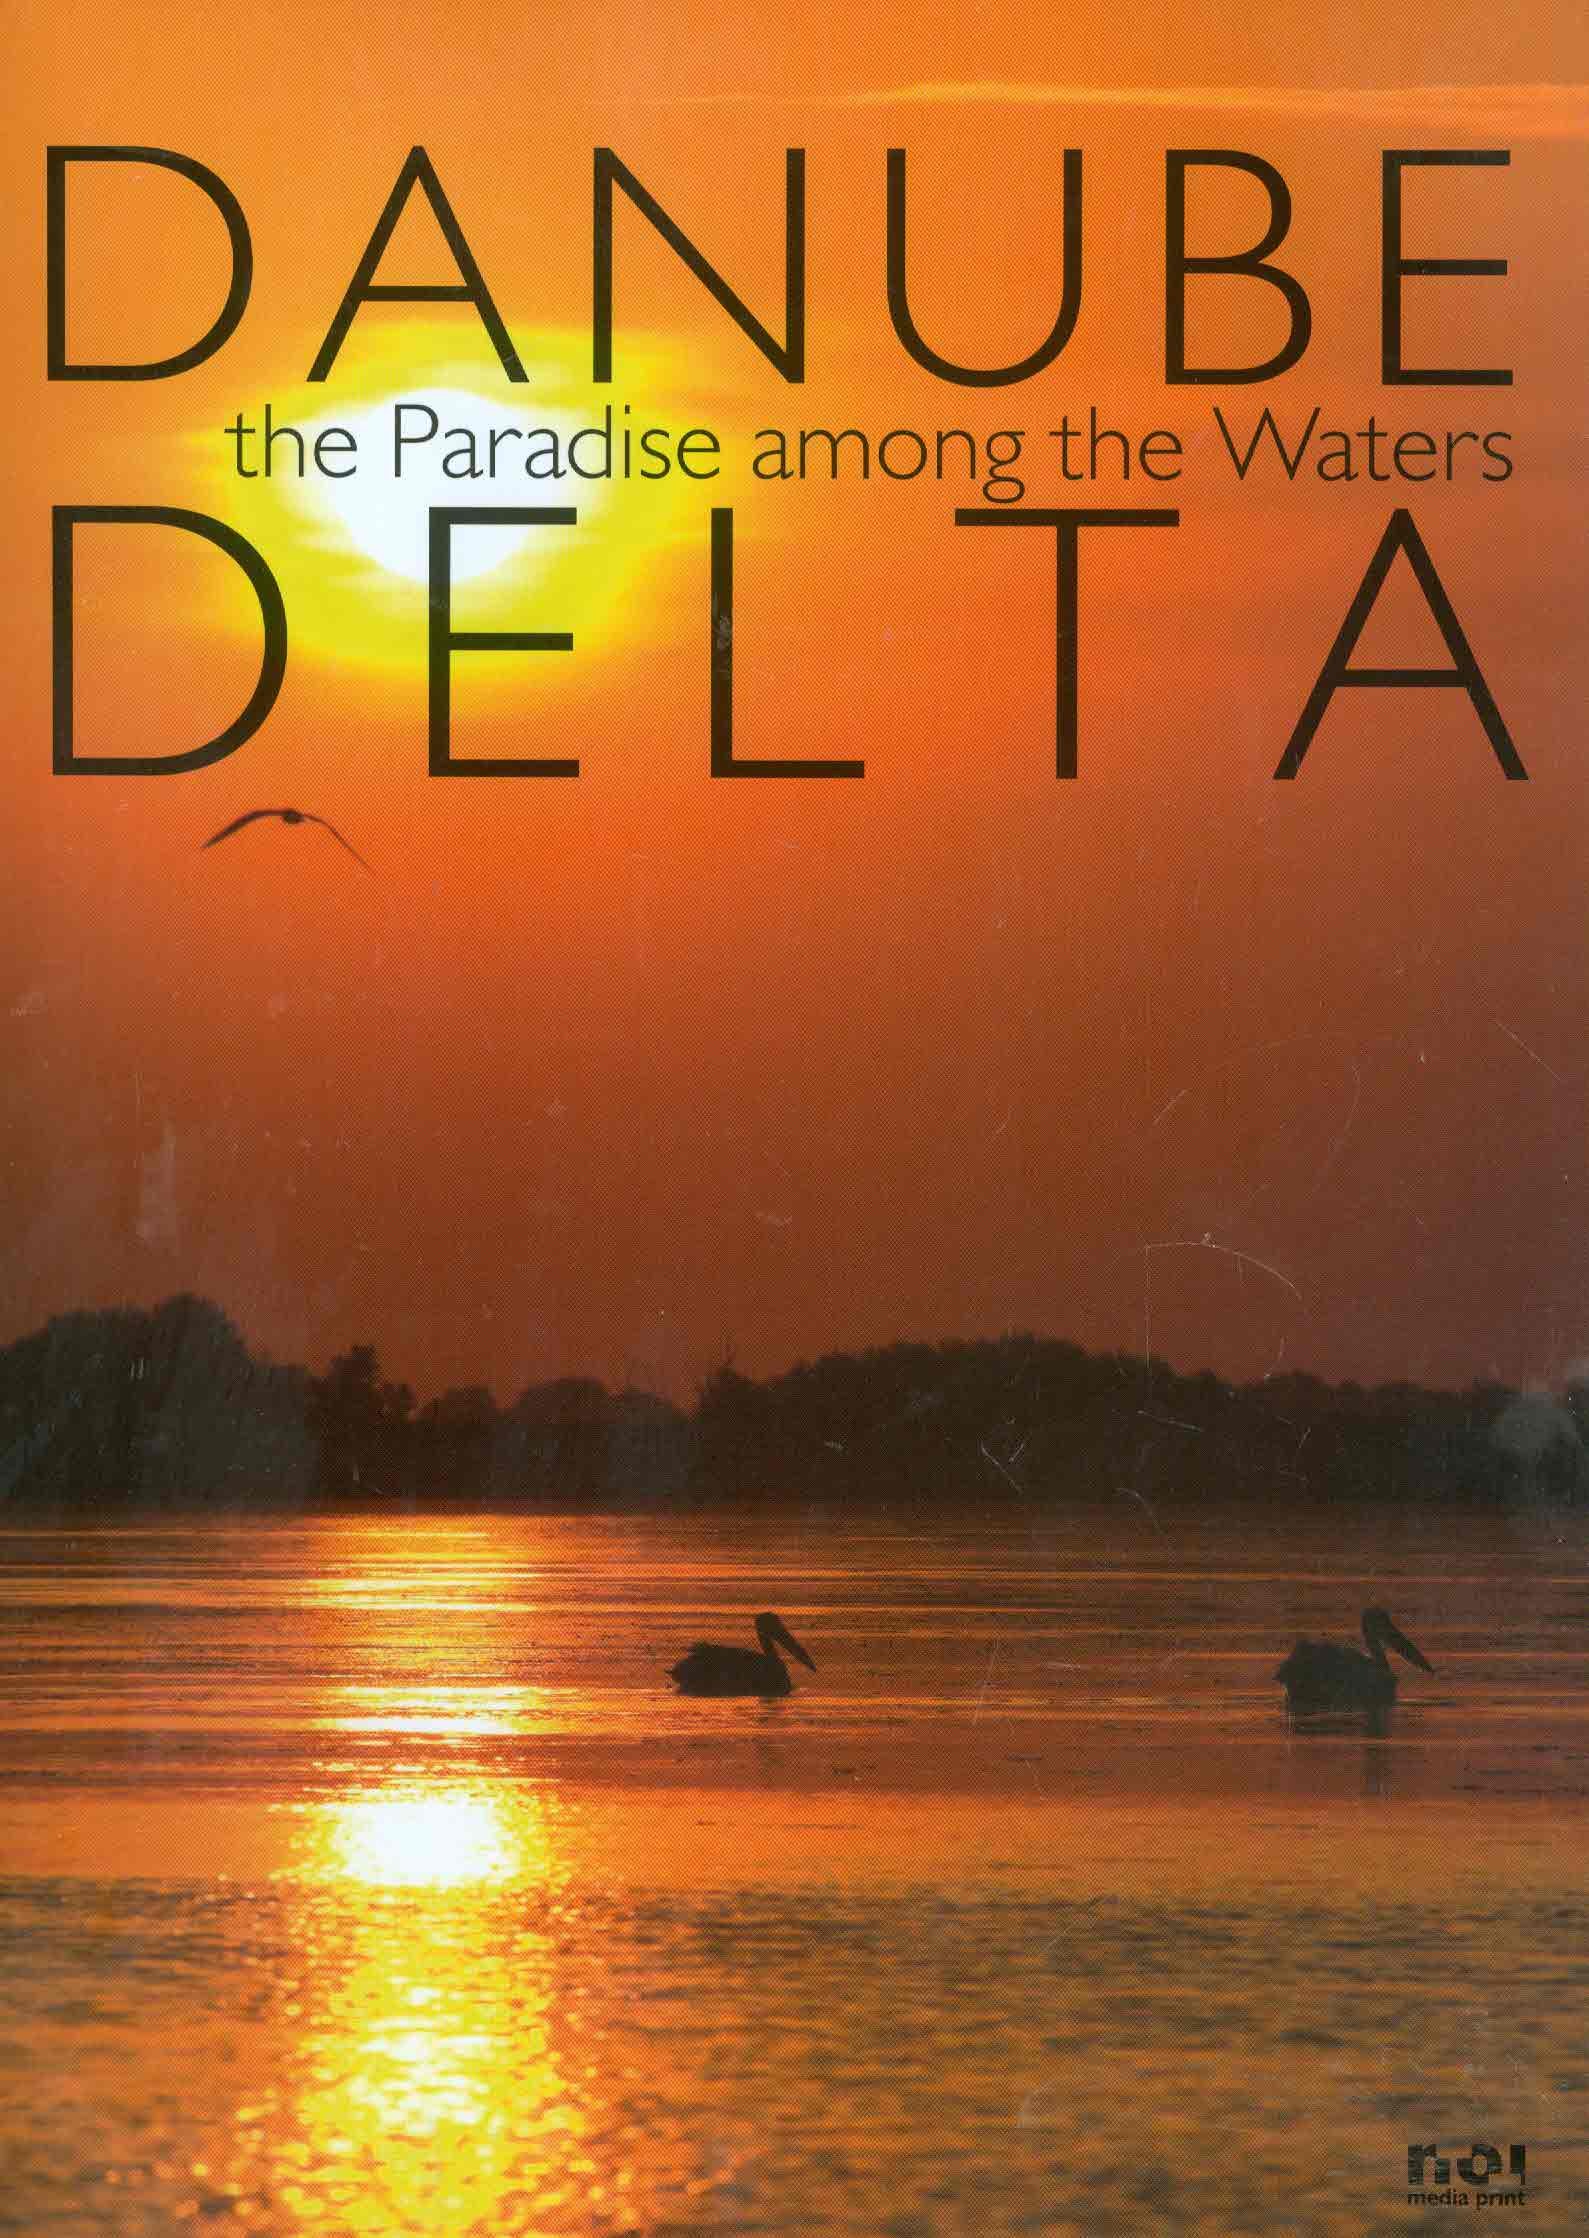 Danube Delta the Paradise Among the Waters